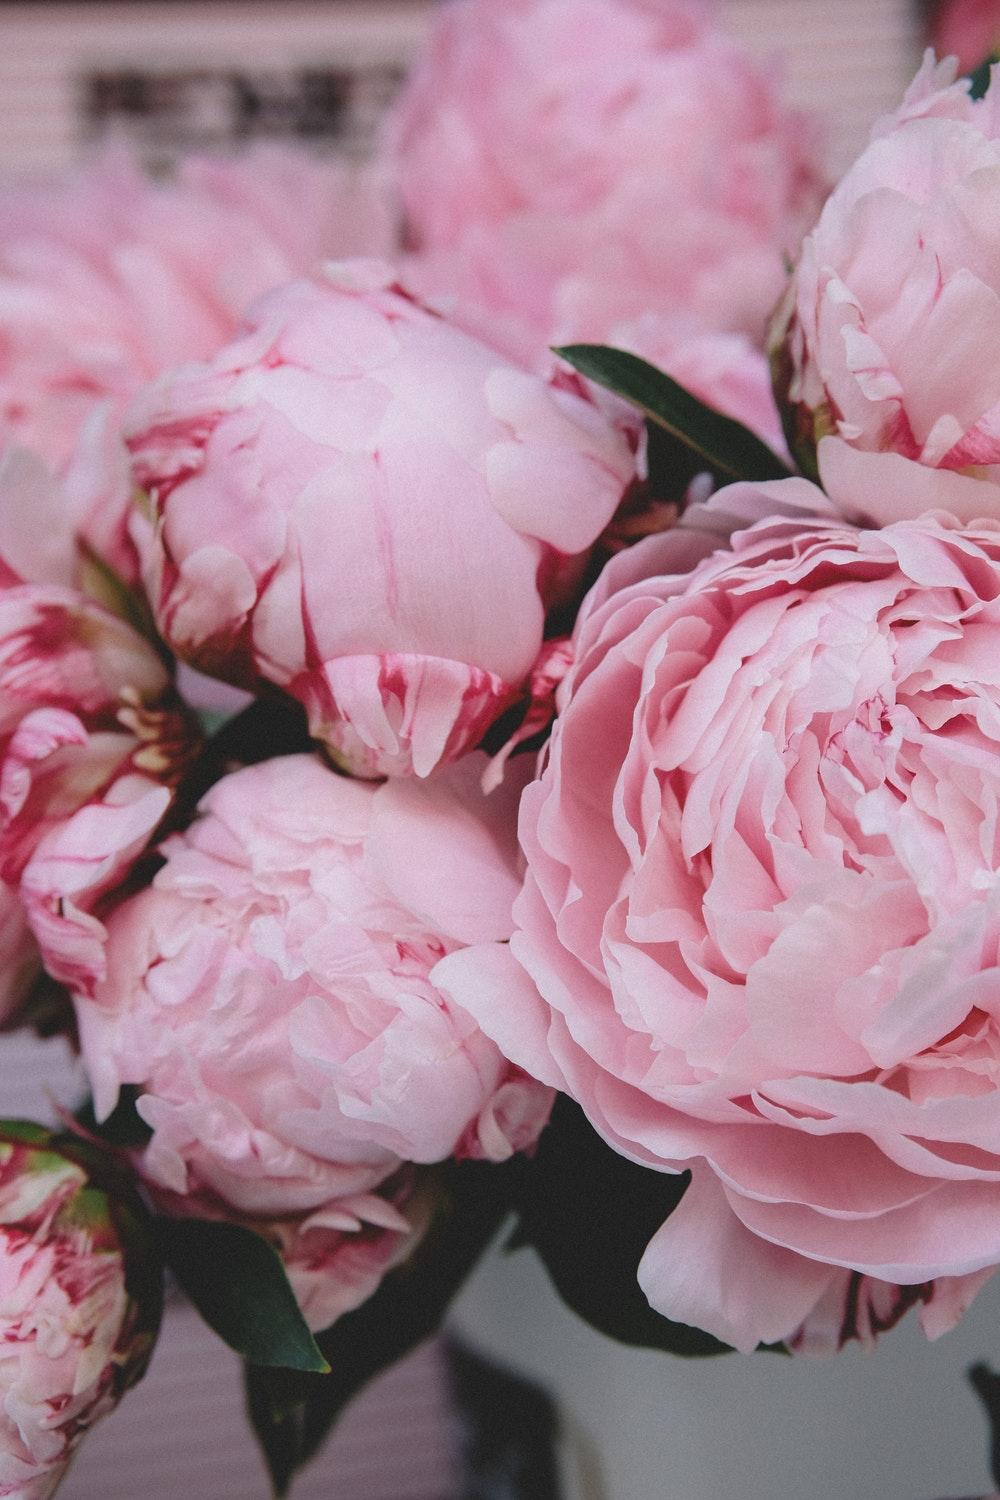 Peonies Picture. Download Free Image